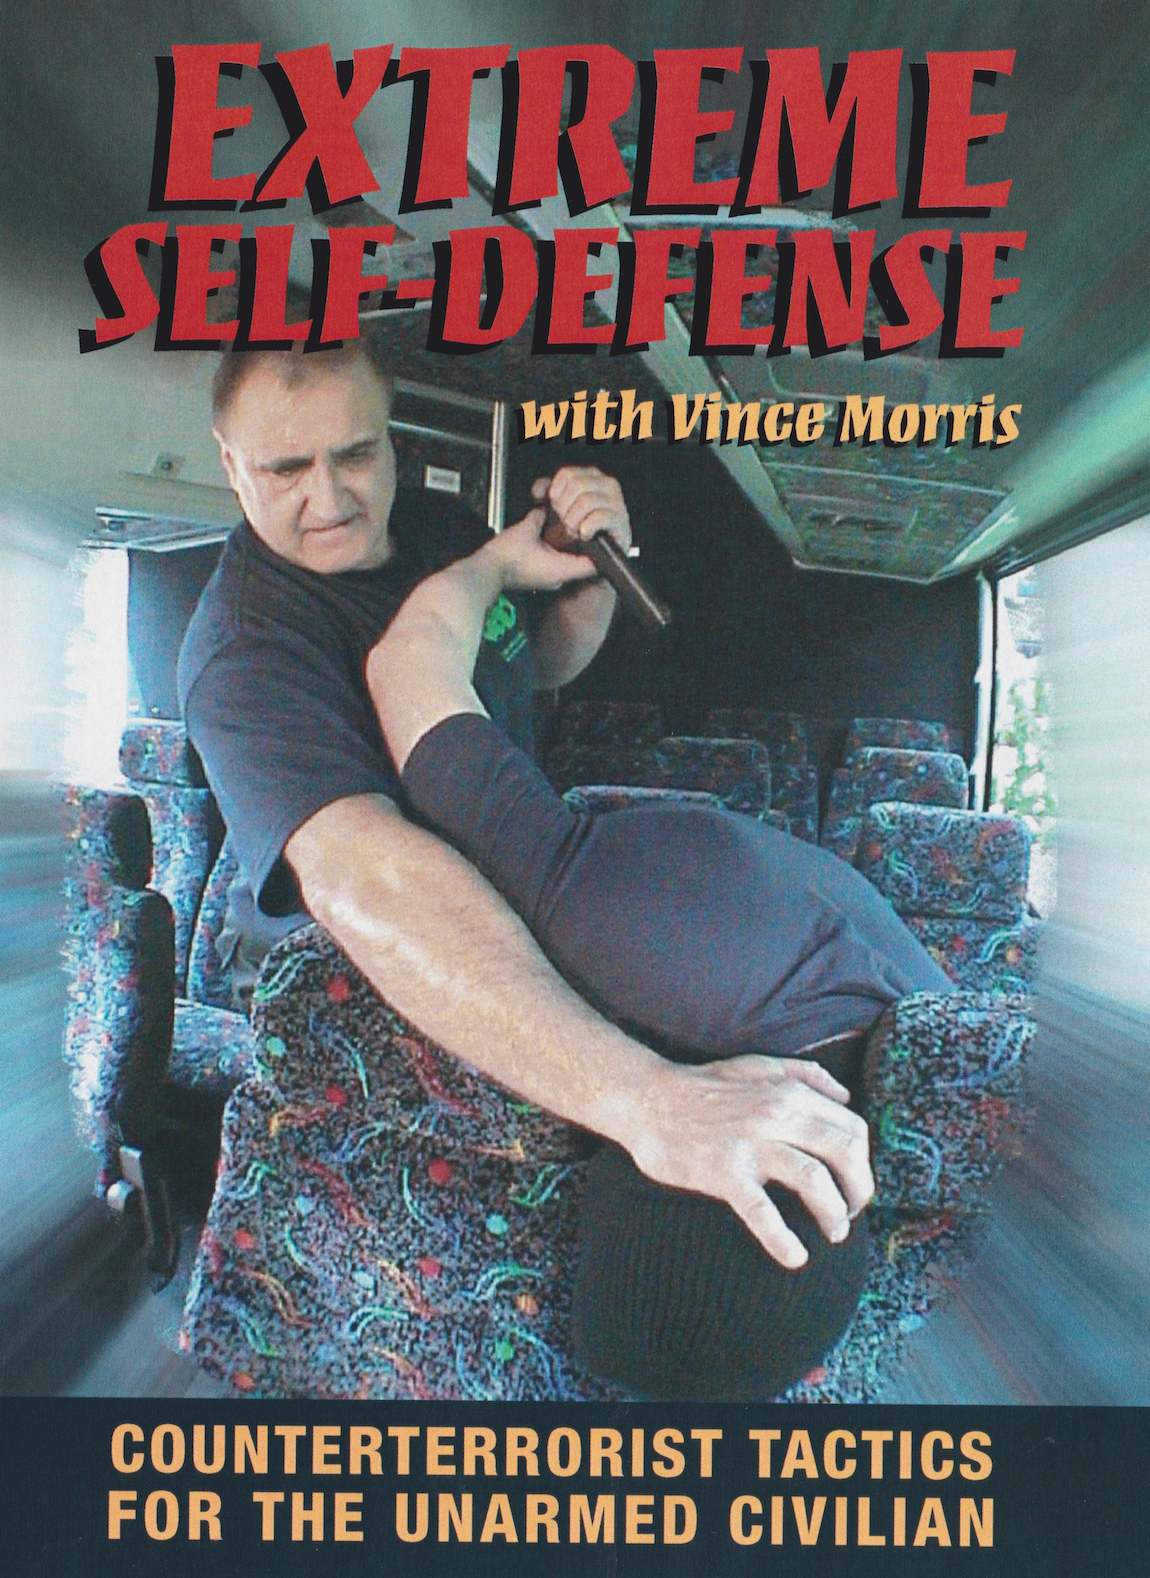 Extreme Self Defense DVD by Vince Morris (Preowned)